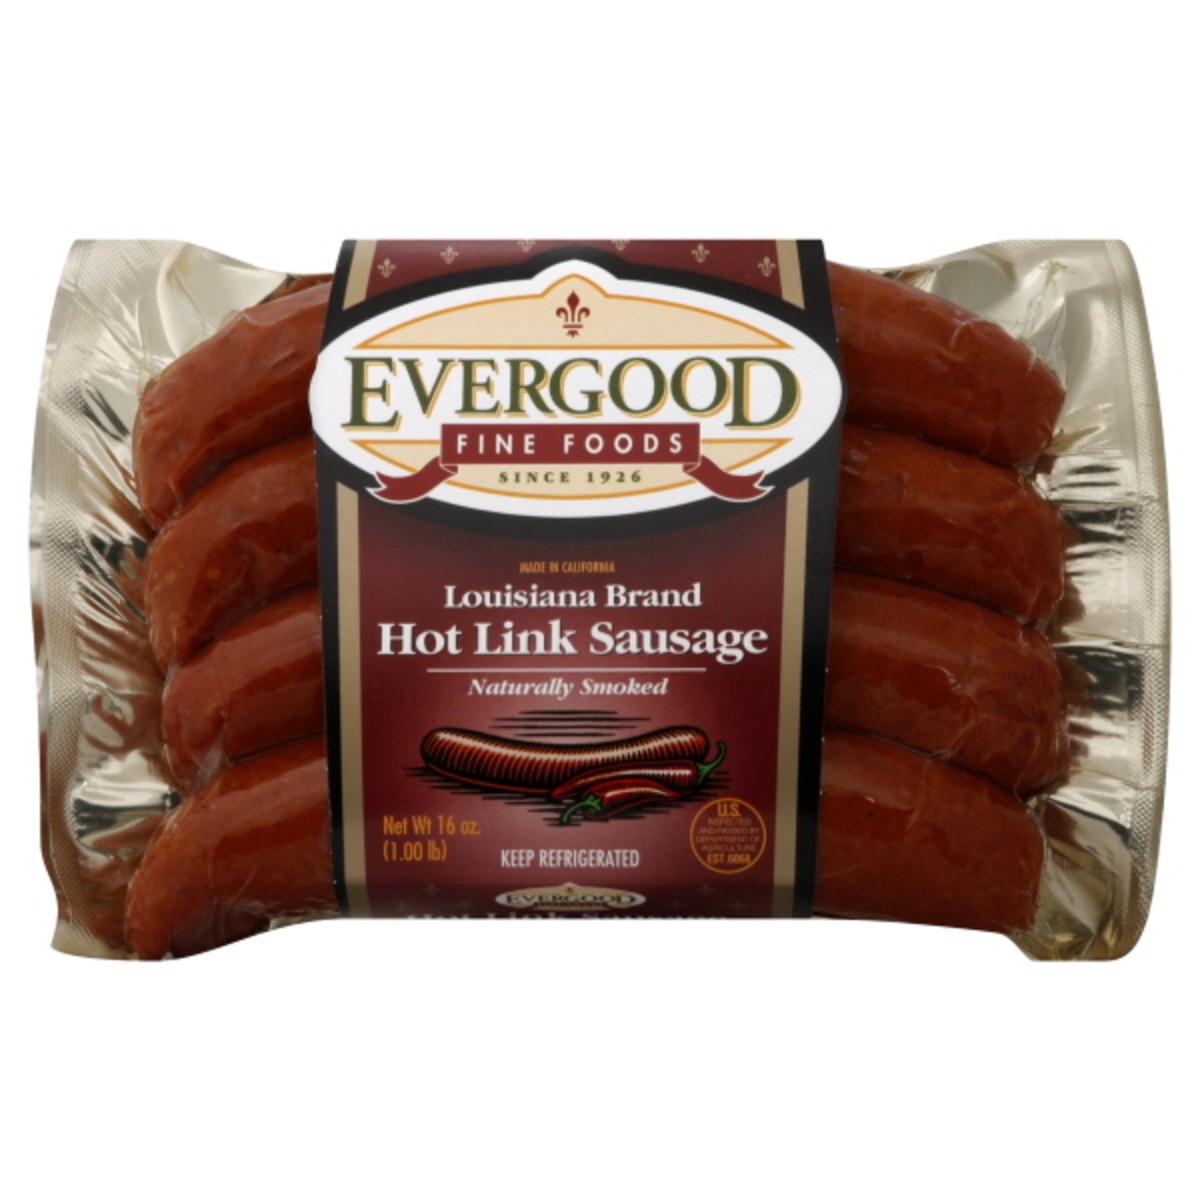 All beef hot links - 13 oz